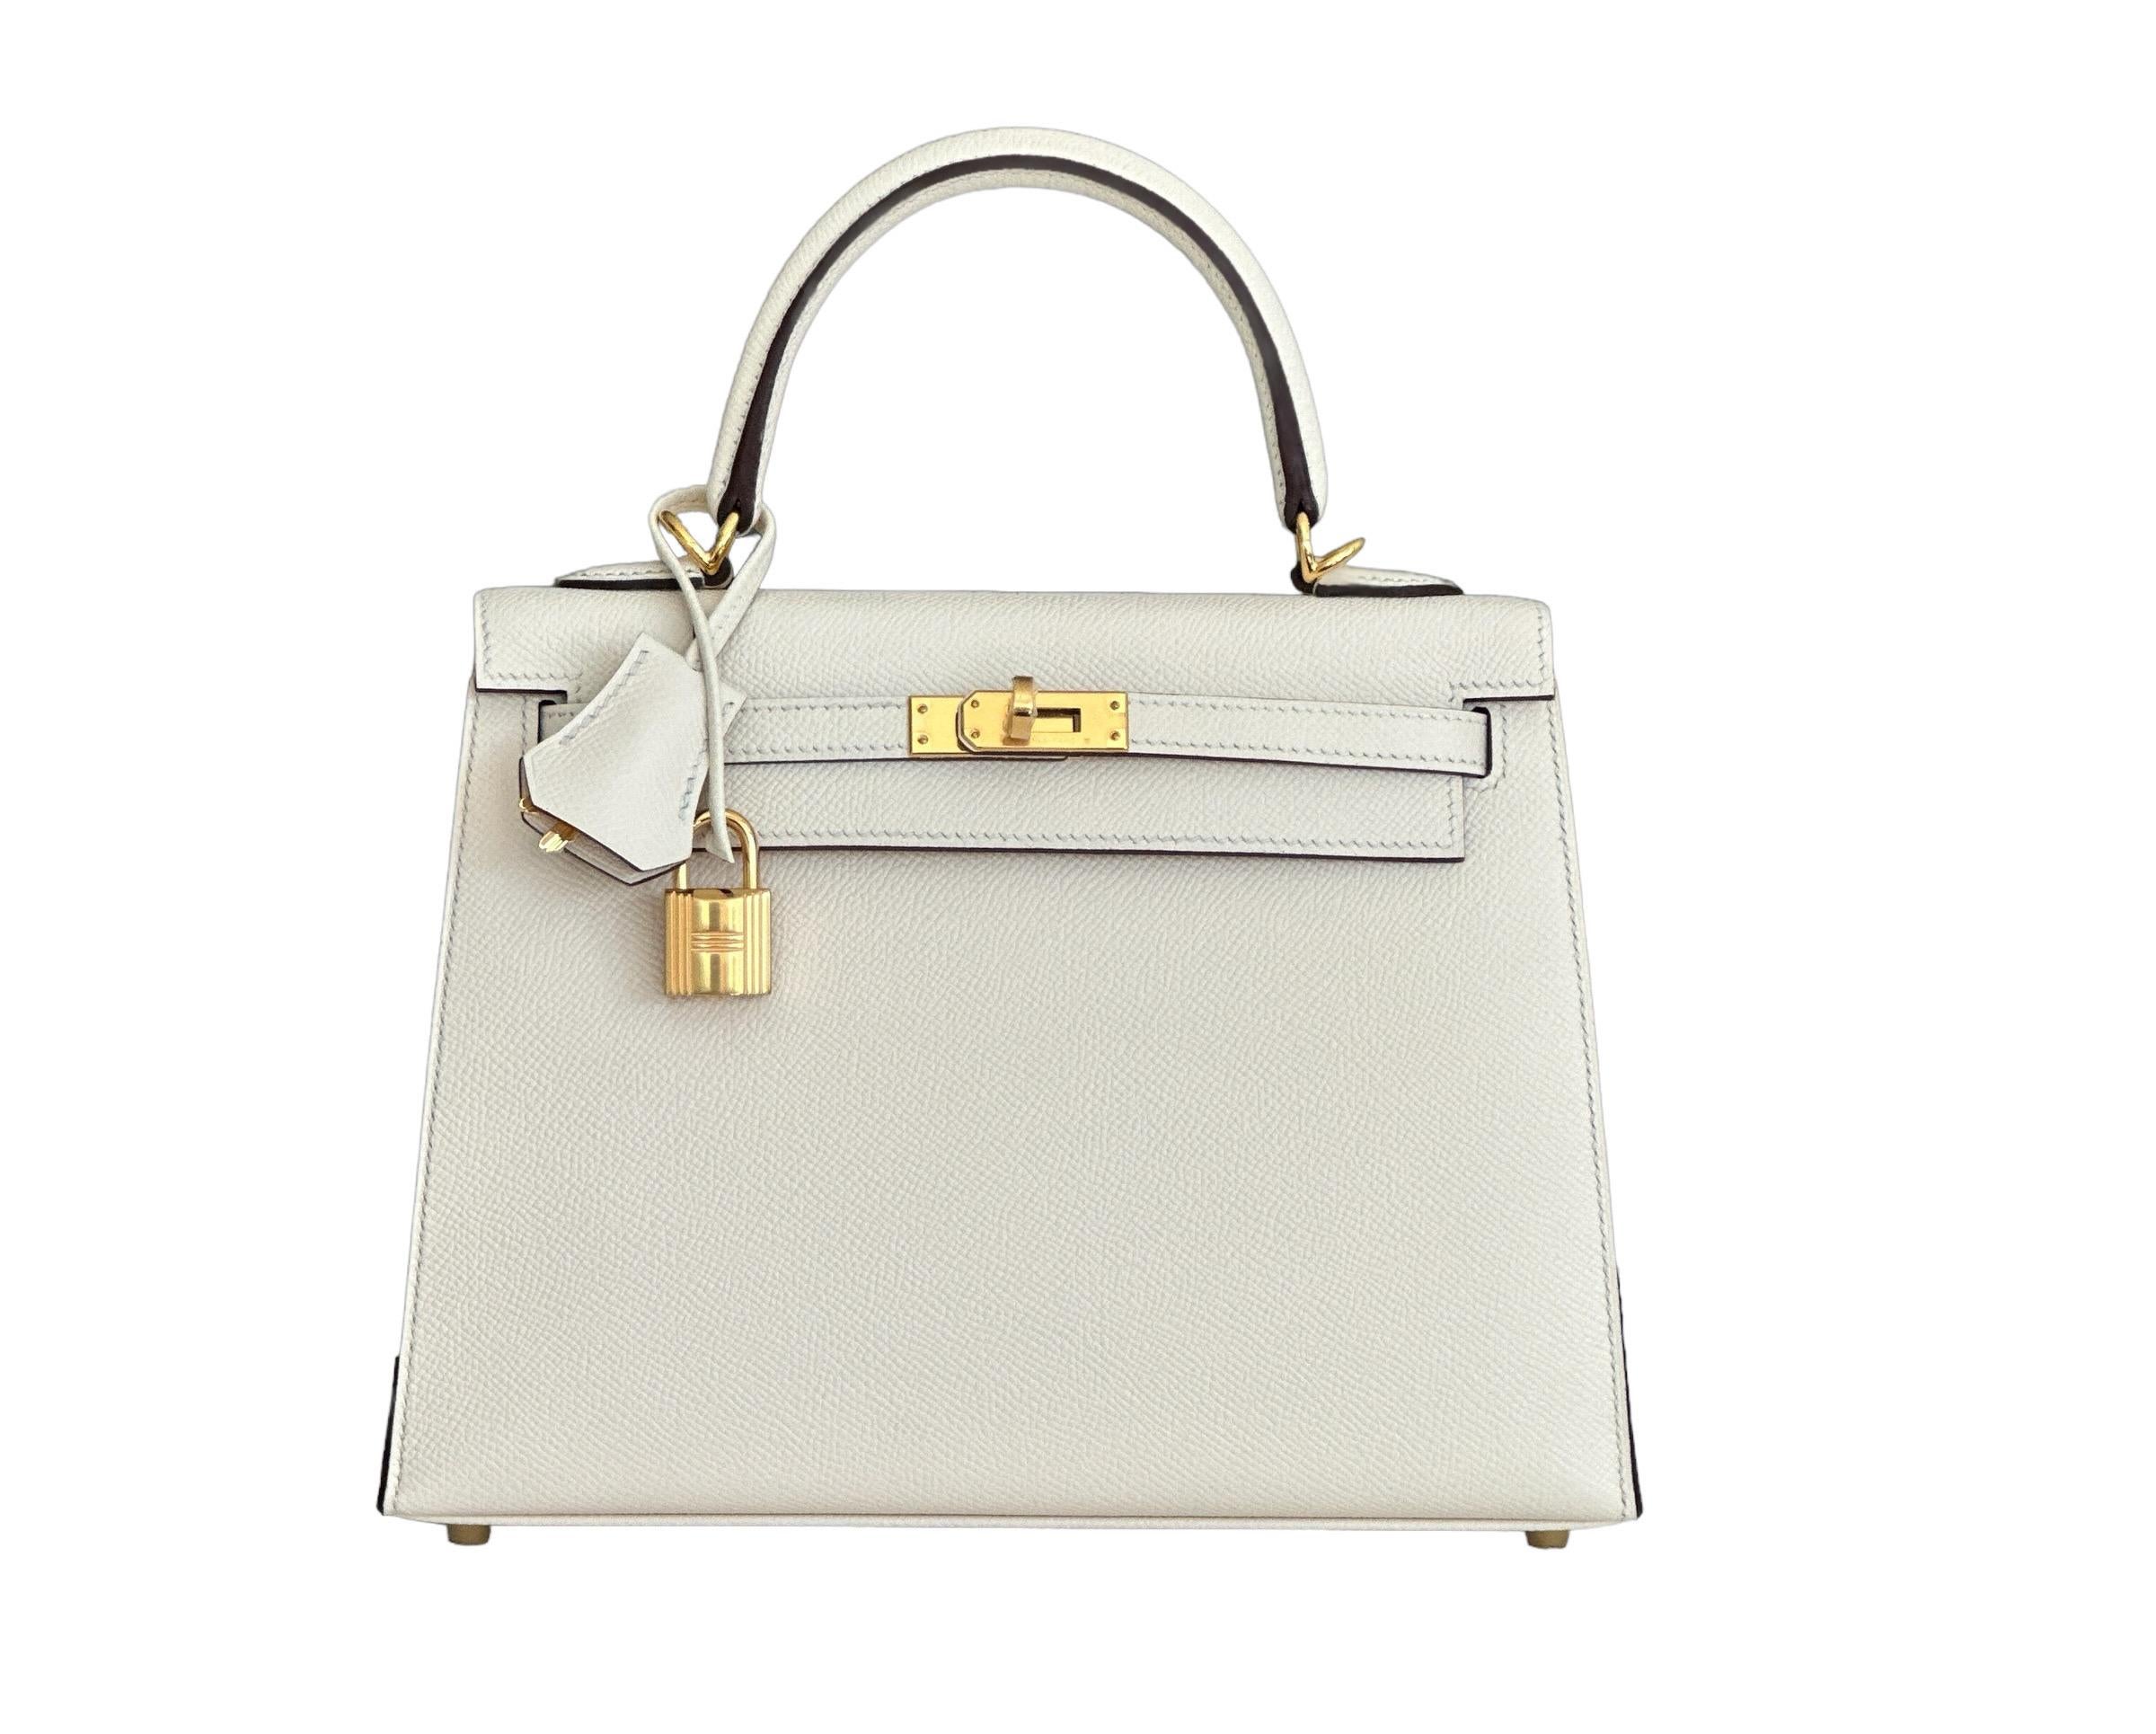 Hermes Kelly 25cm Sellier Style, Rigid
Nata Epsom with Gold Hardware, brand new
Collectors Dream
Almost Impossible to Find
We have it!
We took photos in different lights , Nata is a creamy off white color

The Hermes Kelly Bag is a luxurious handbag